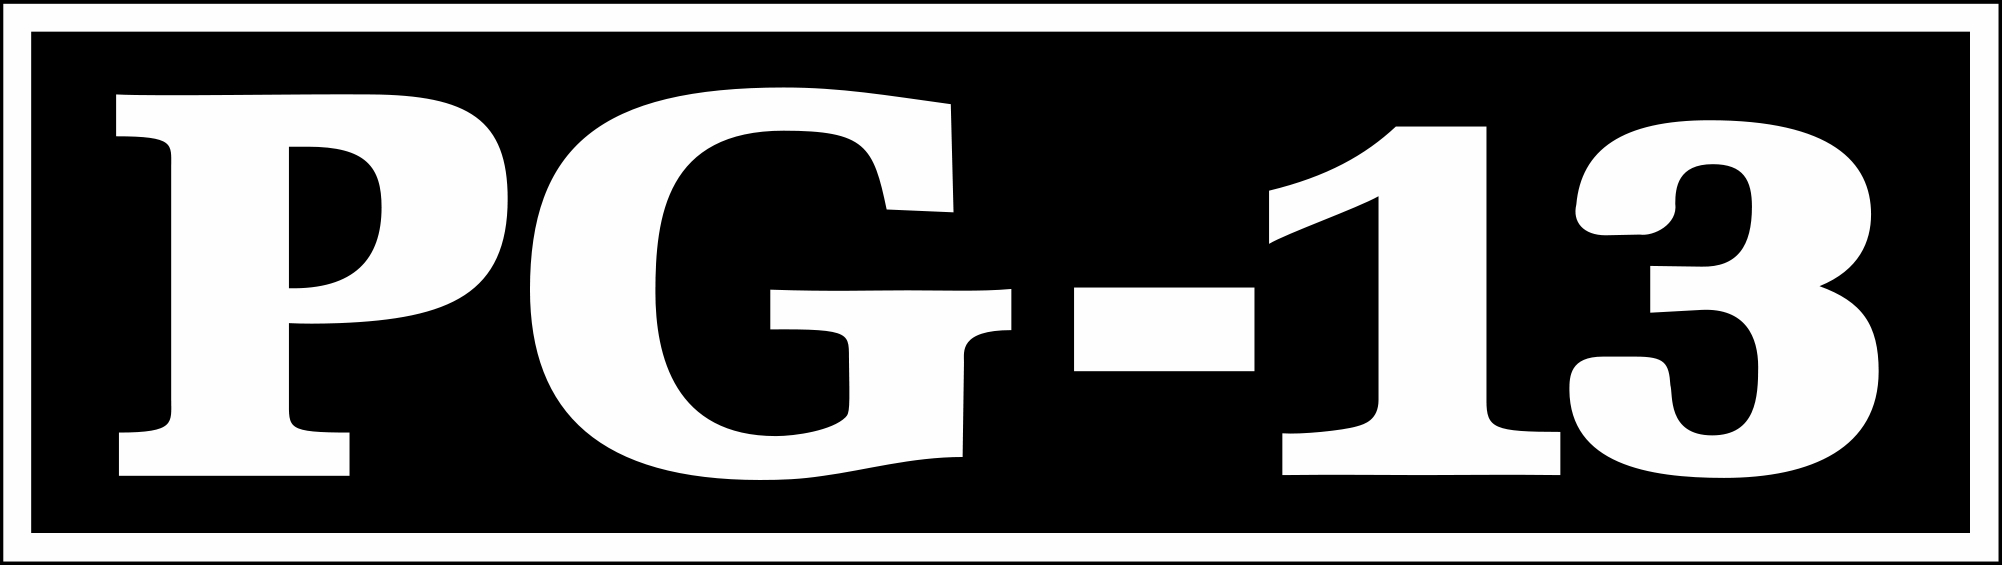 Rated Pg 13 Logo